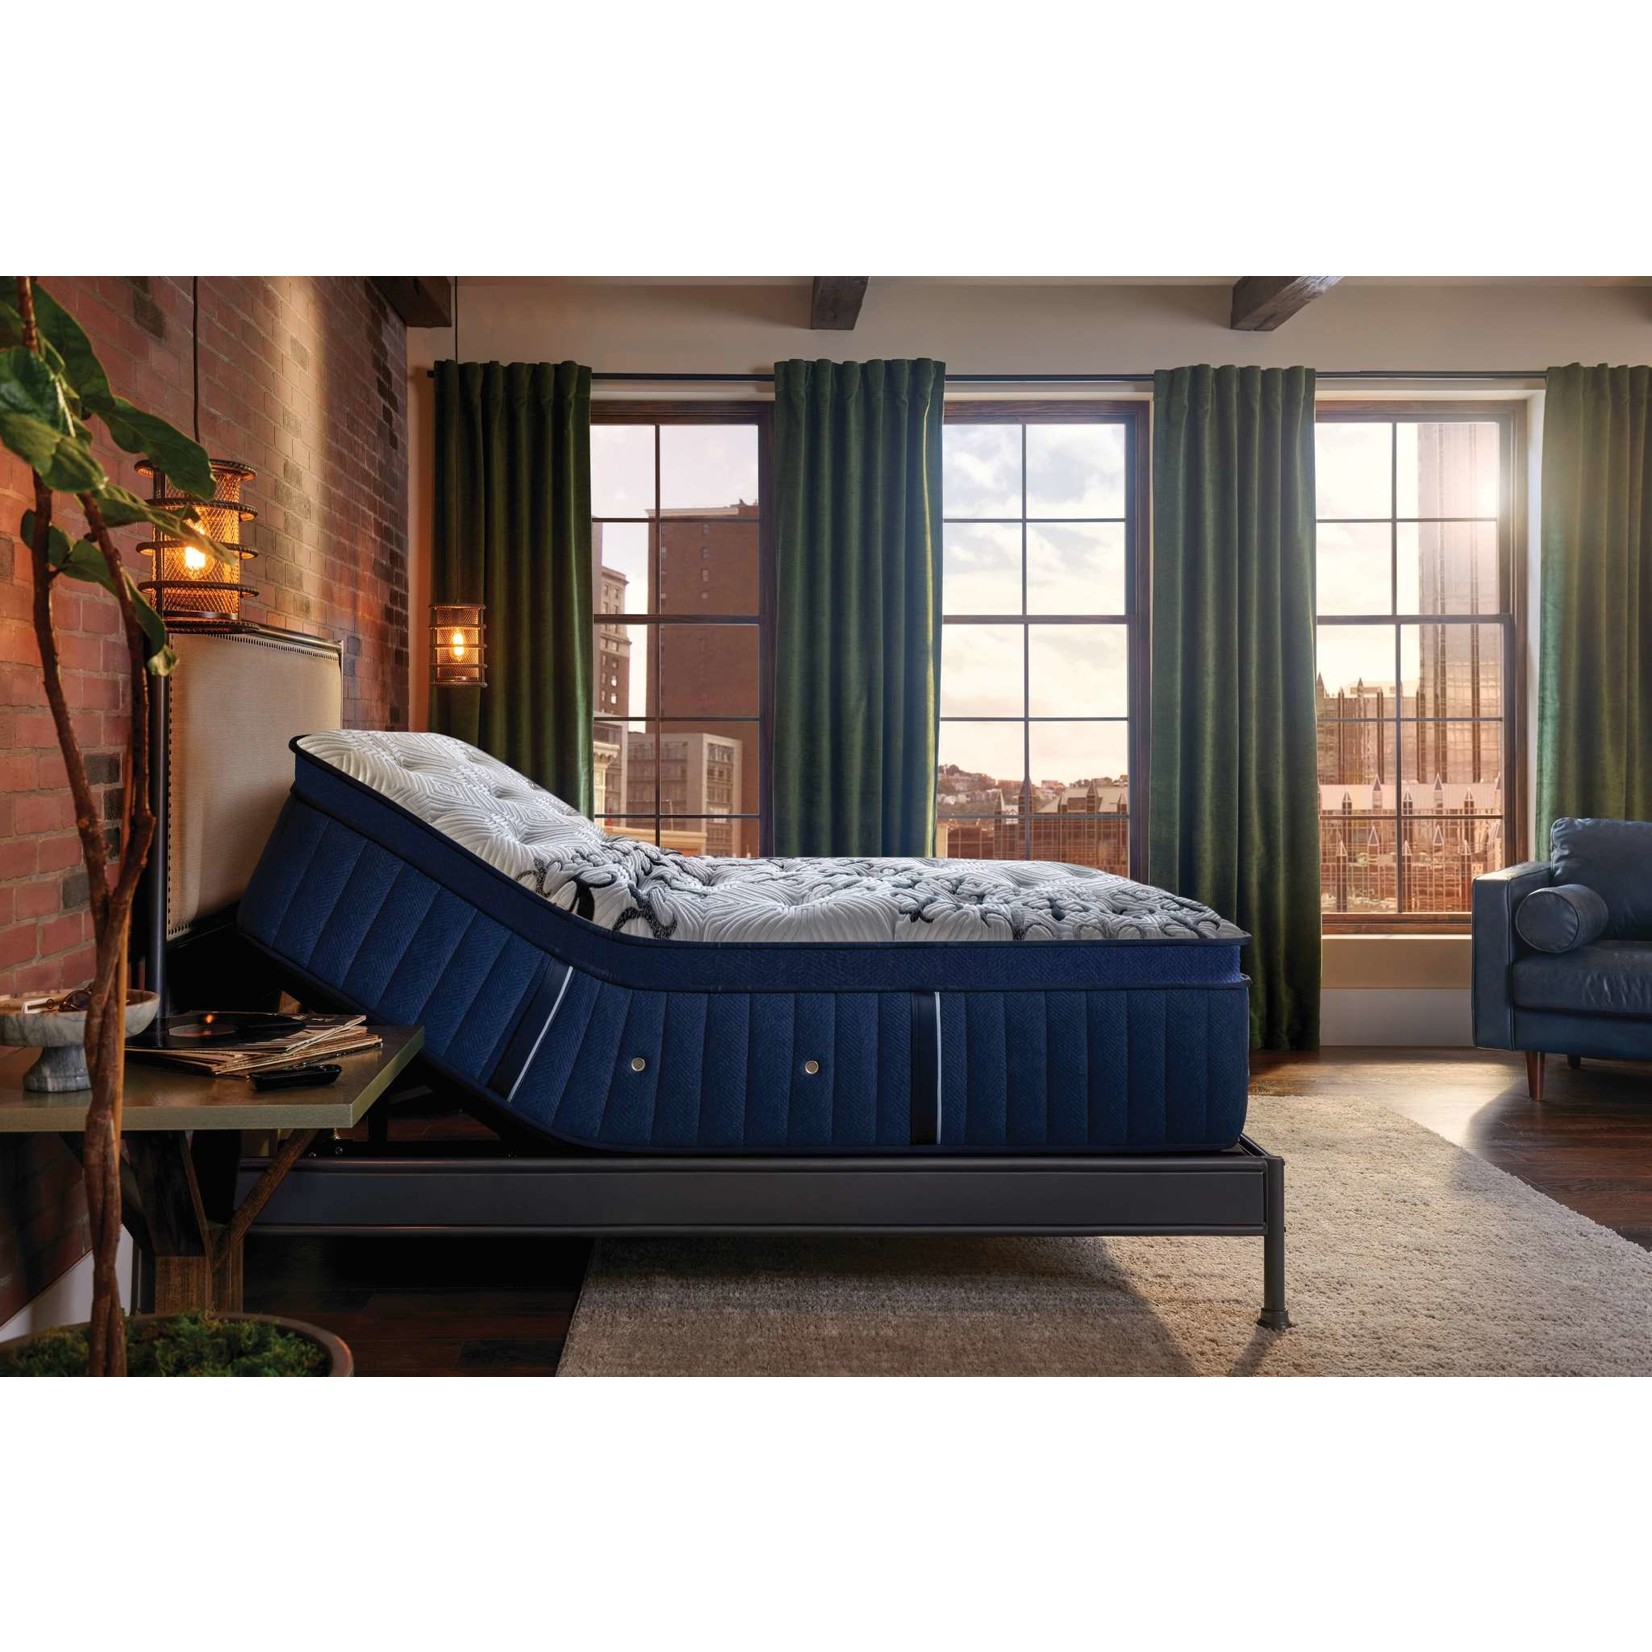 STEARNS AND FOSTER MON AMOUR LXPET S&F  MATTRESS